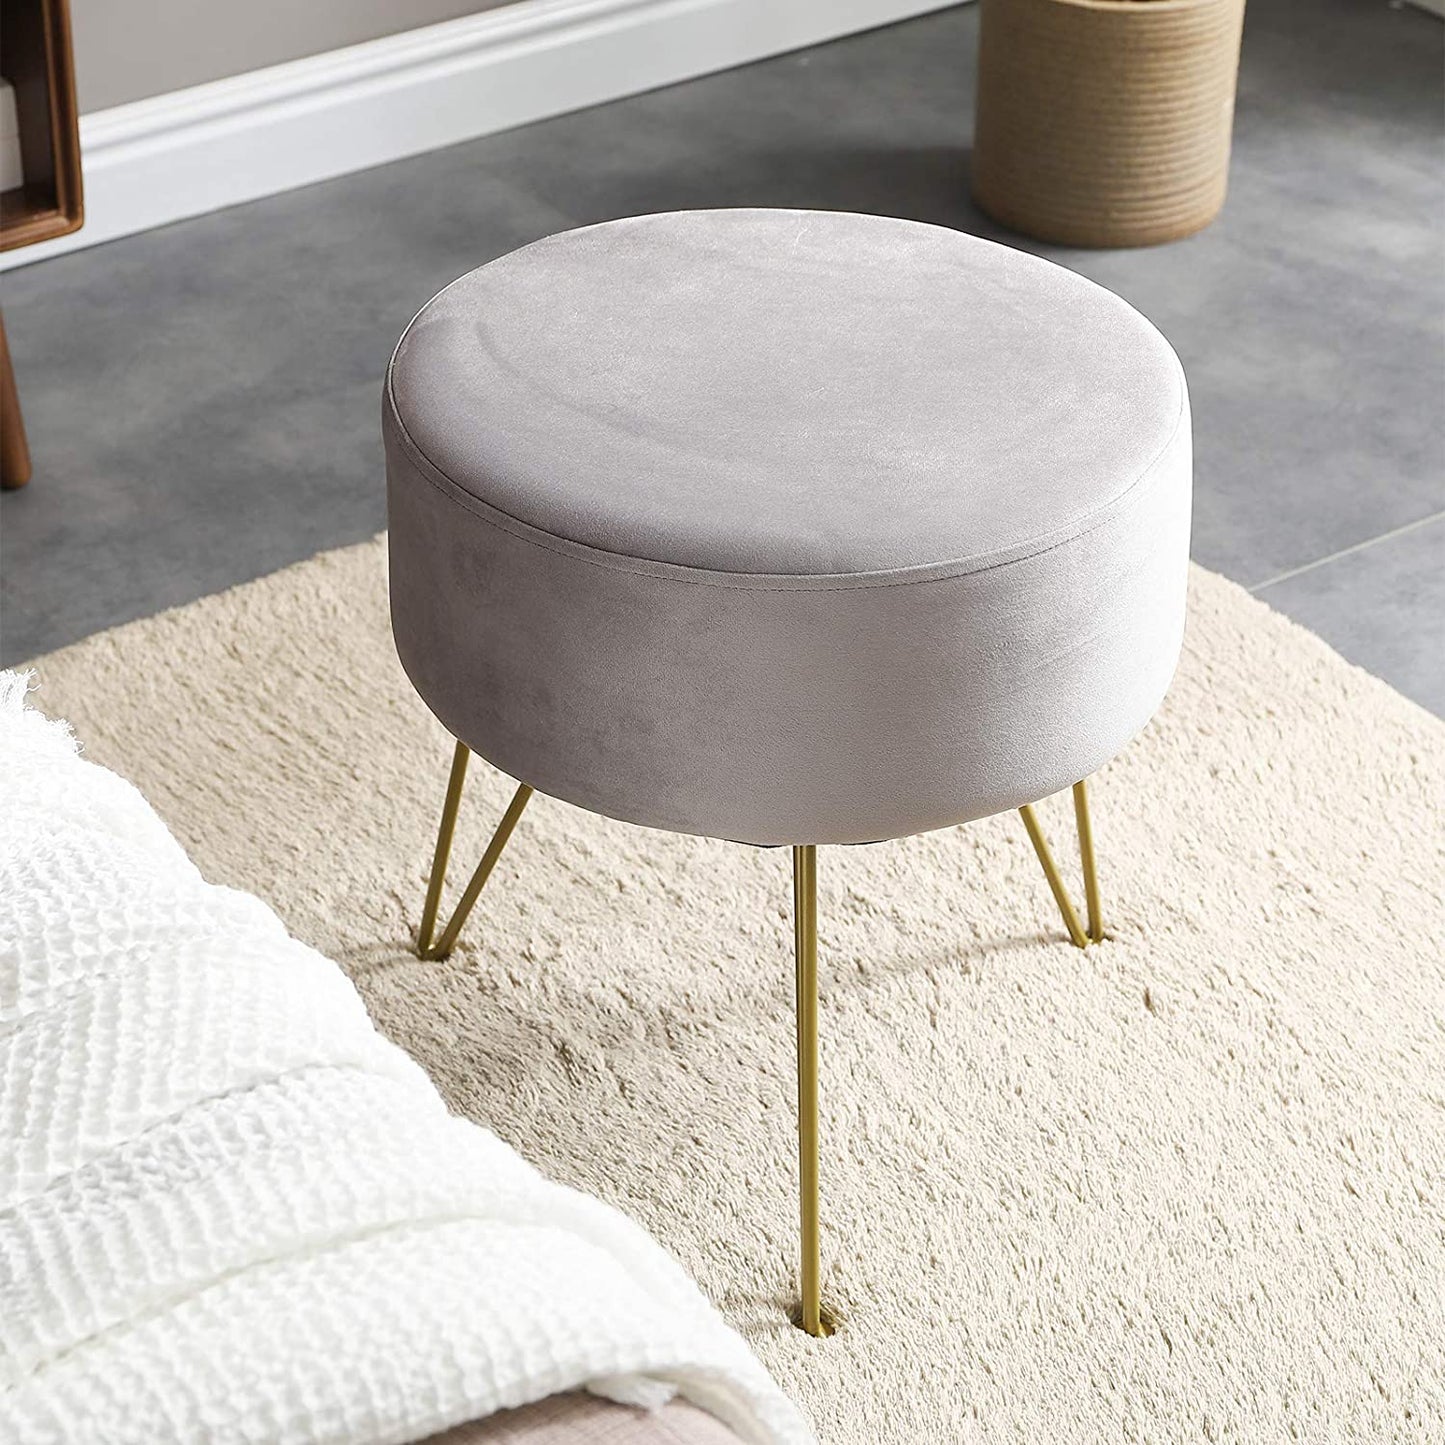 Footstool Velvet round Ottoman Pouffe Stool Dressing Table Stool Metal Legs Removable Cover, for Home Living Room Fitting Room Bedroom Office, Makeup RF-010